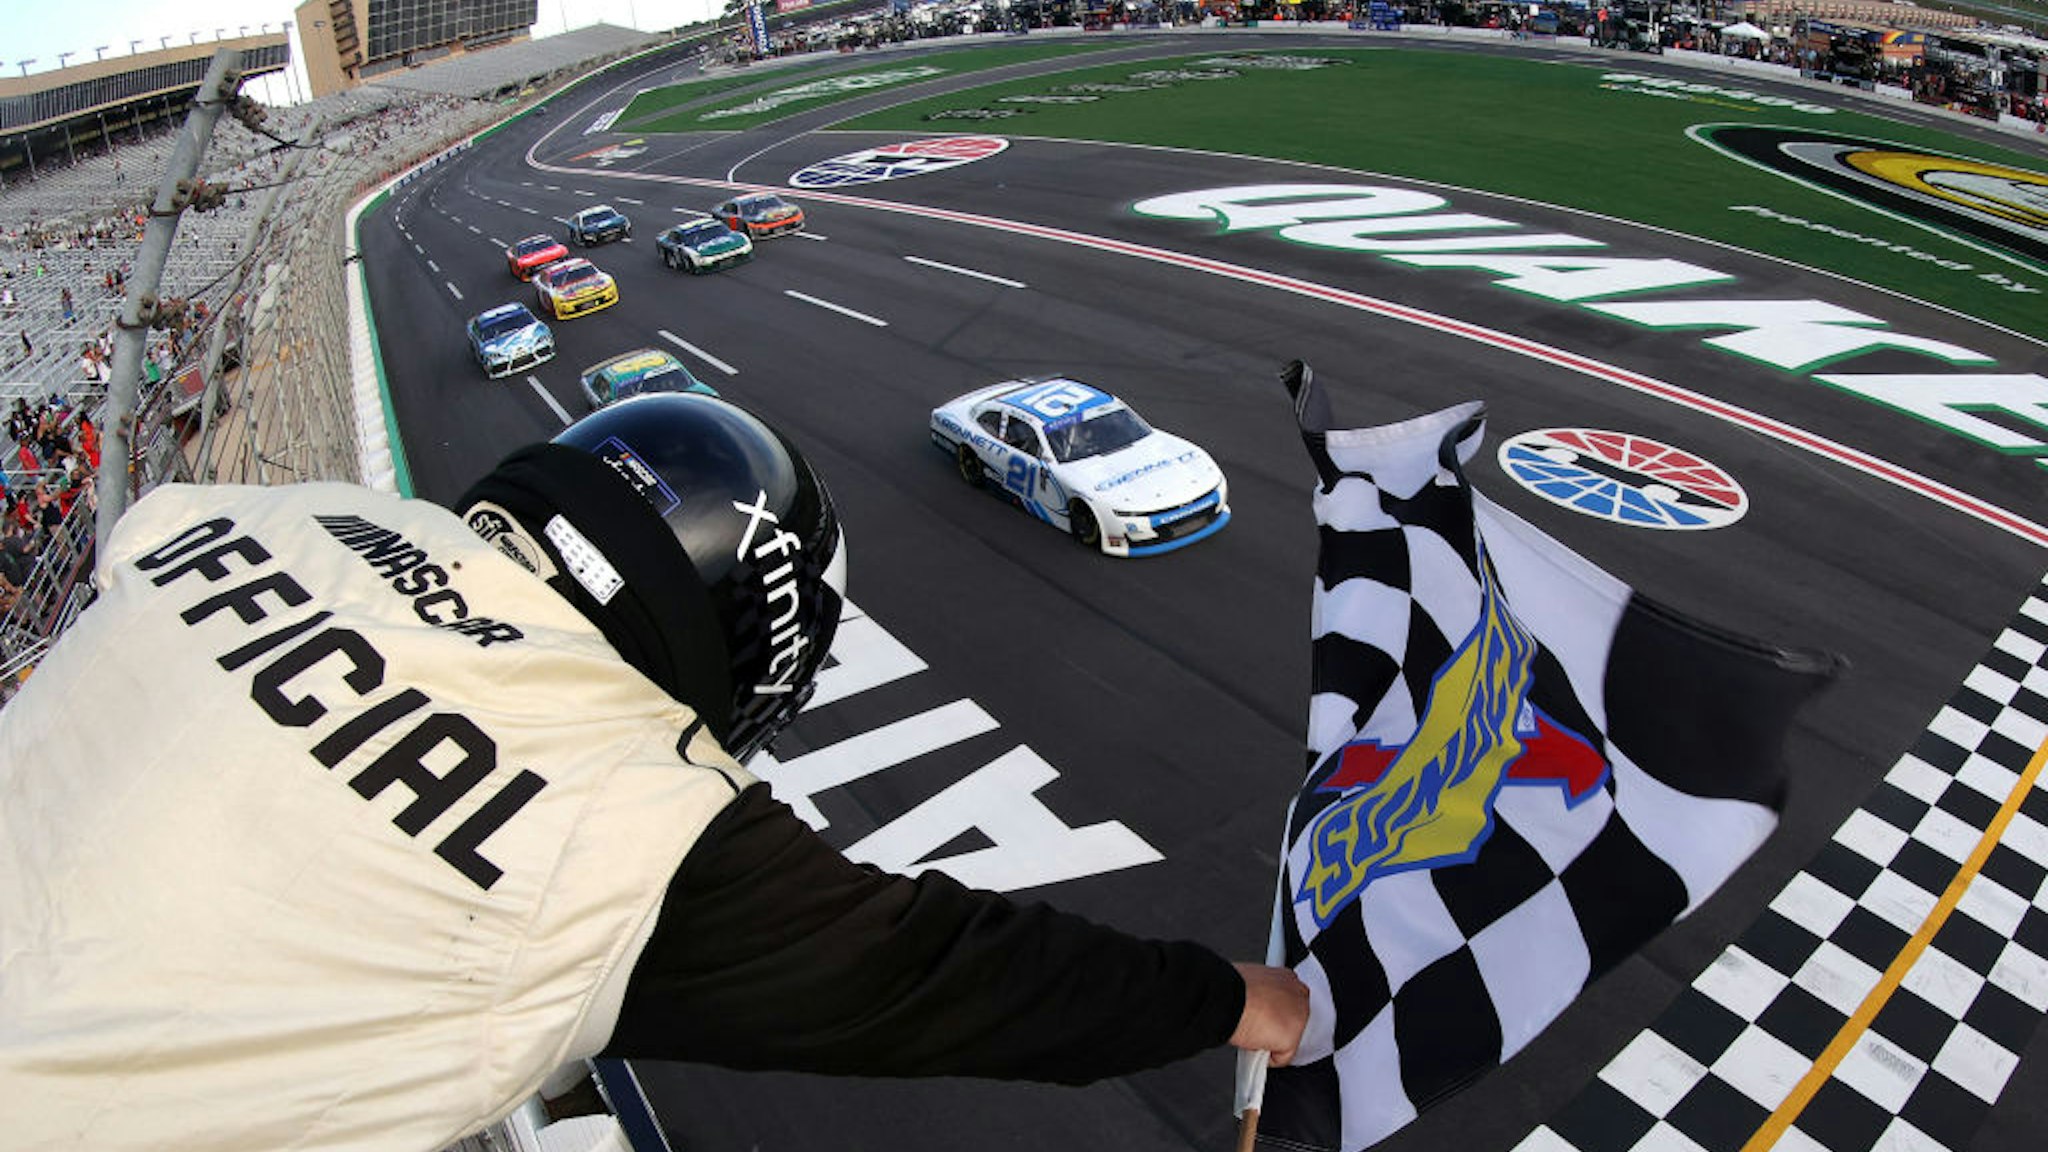 Austin Hill, driver of the #21 Bennett Transportation and Logistics Chevrolet, takes the checkered flag to win the NASCAR Xfinity Series Alsco Uniforms 250 at Atlanta Motor Speedway on July 09, 2022 in Hampton, Georgia.